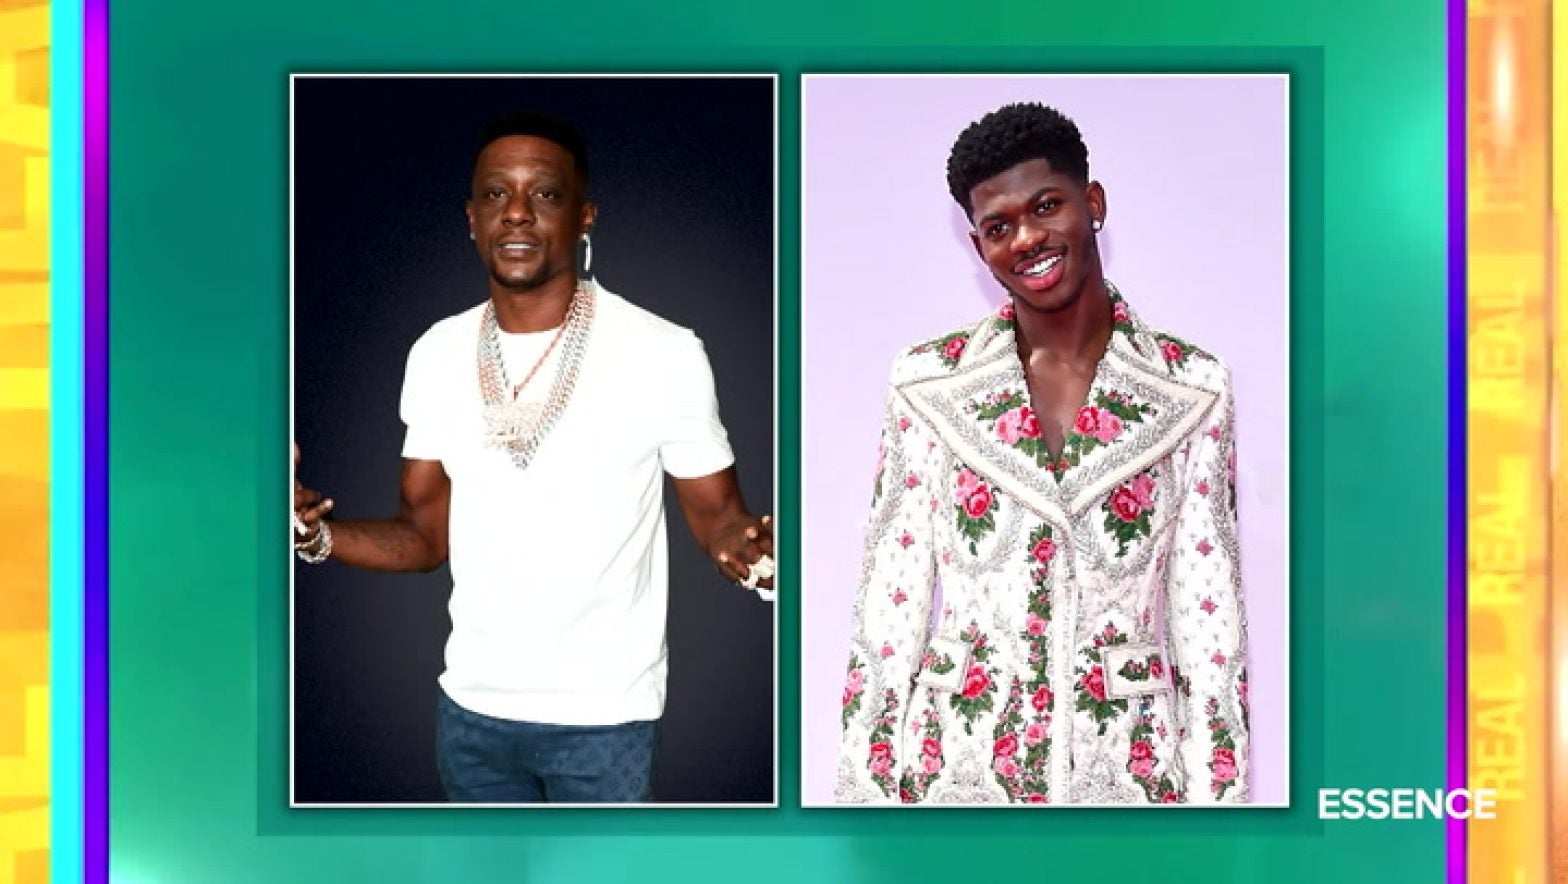 The Social Feed with Essence – Boosie vs Lil Nas X